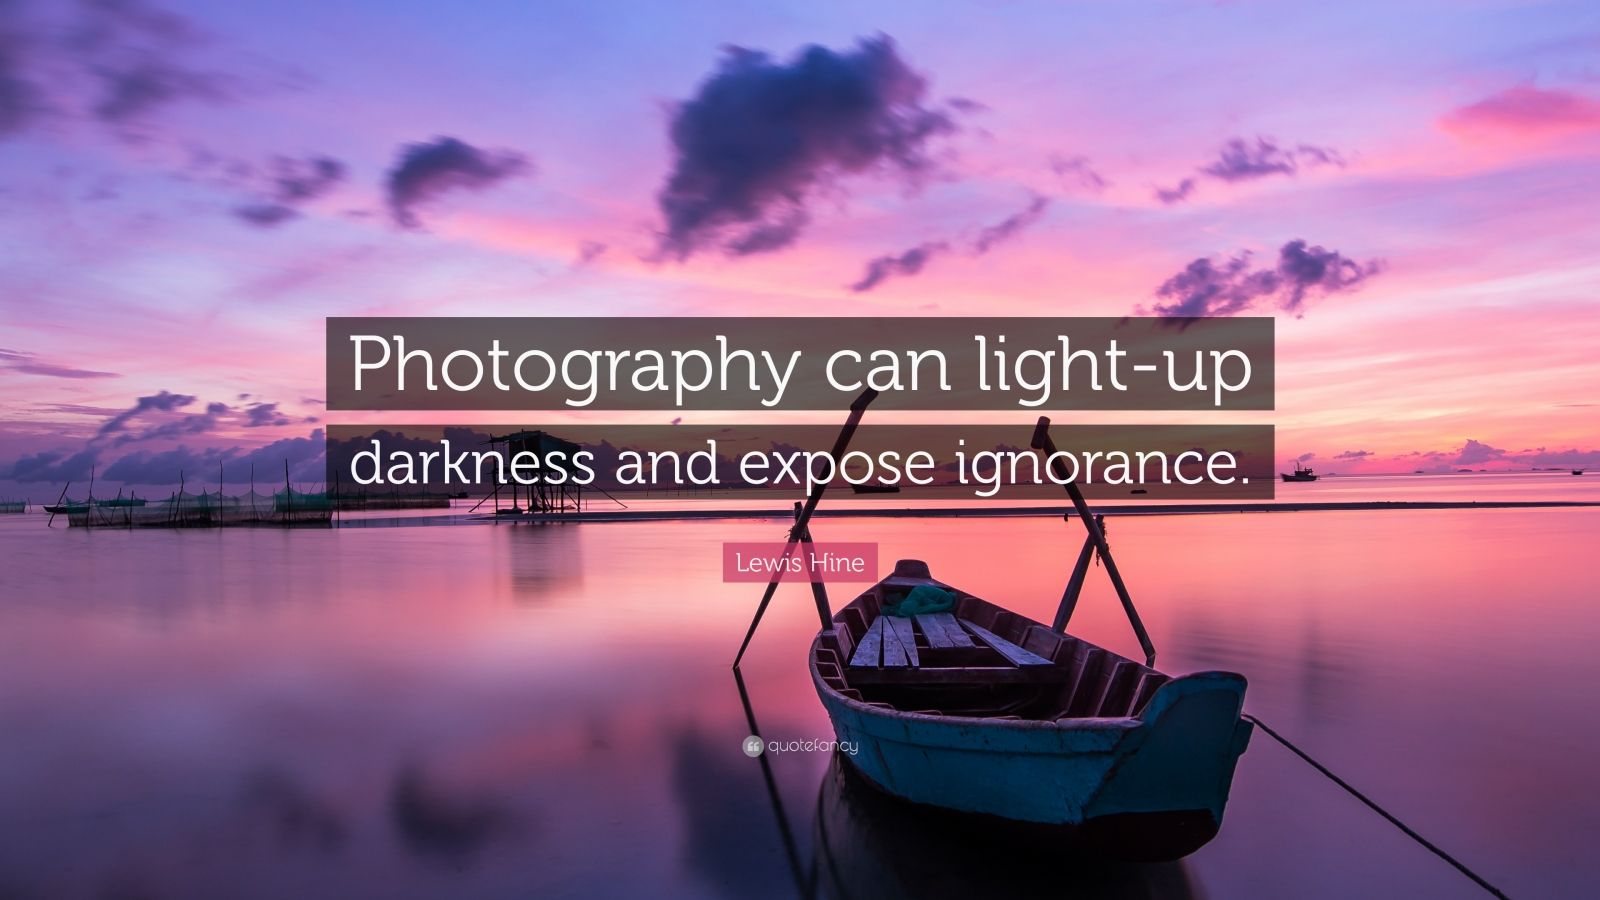 Lewis Hine Quote: "Photography can light-up darkness and expose ignorance." (9 wallpapers ...